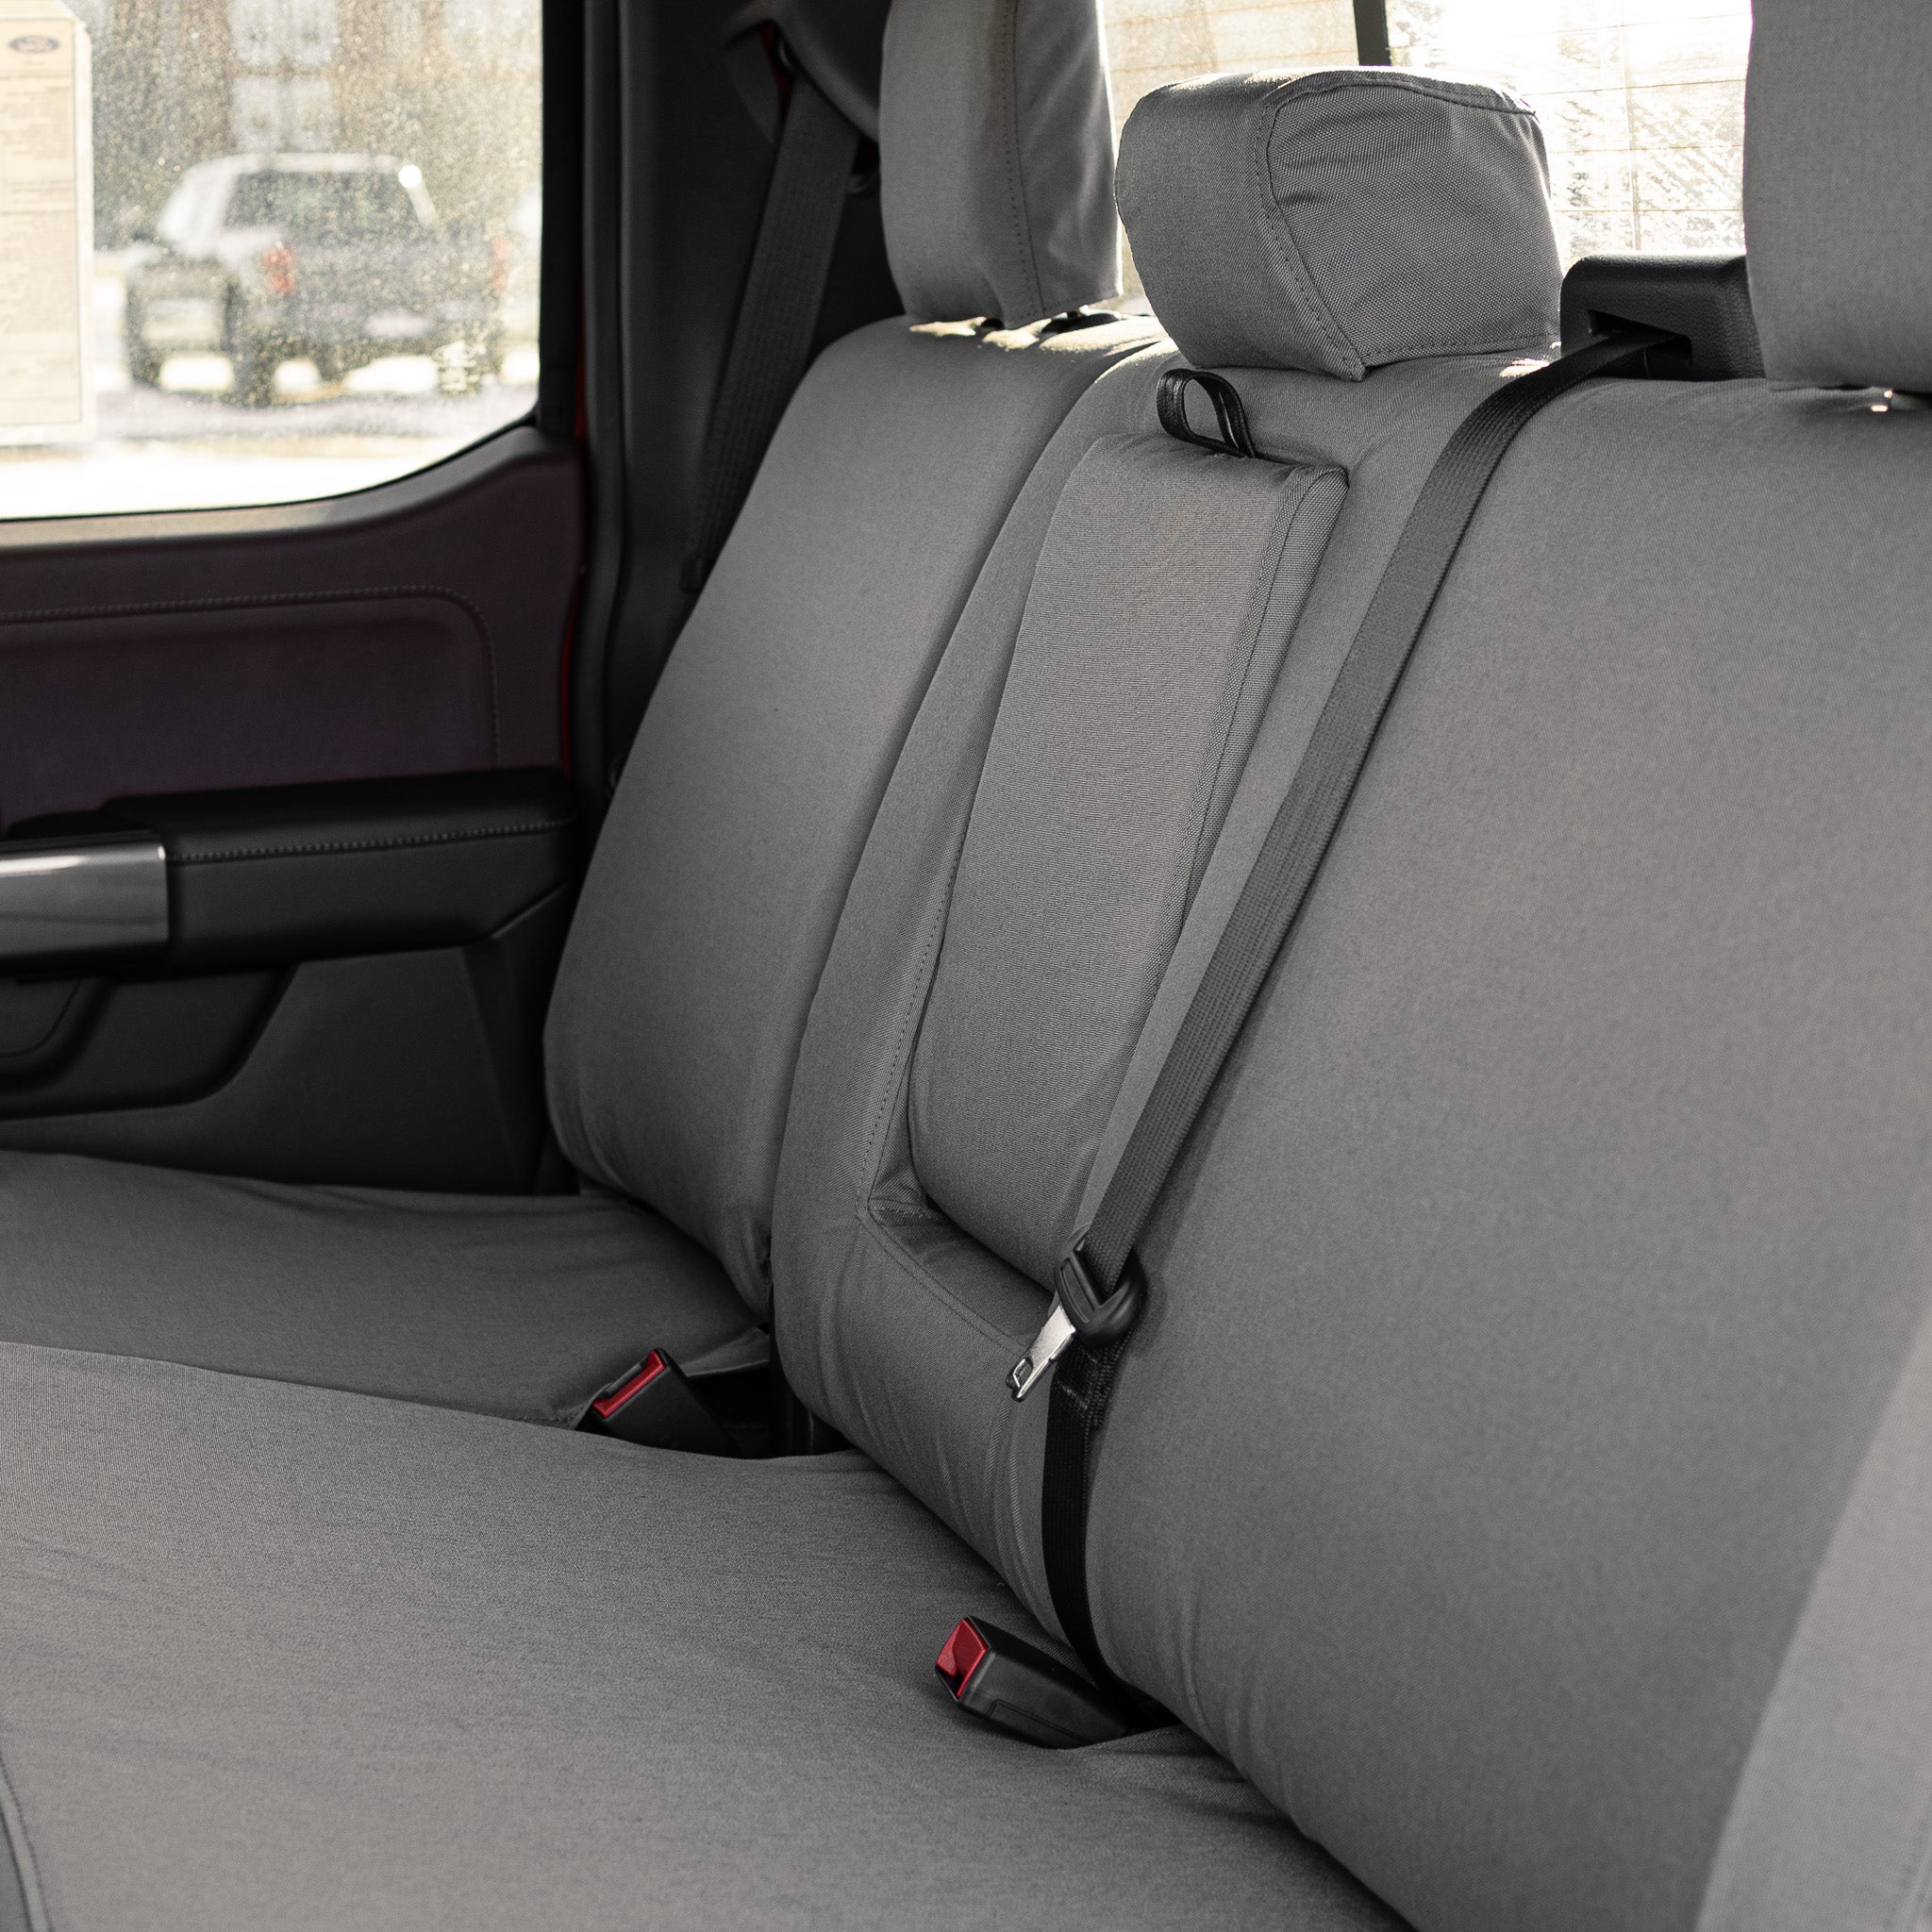 Rear Seat Covers for Ford Truck (55566)